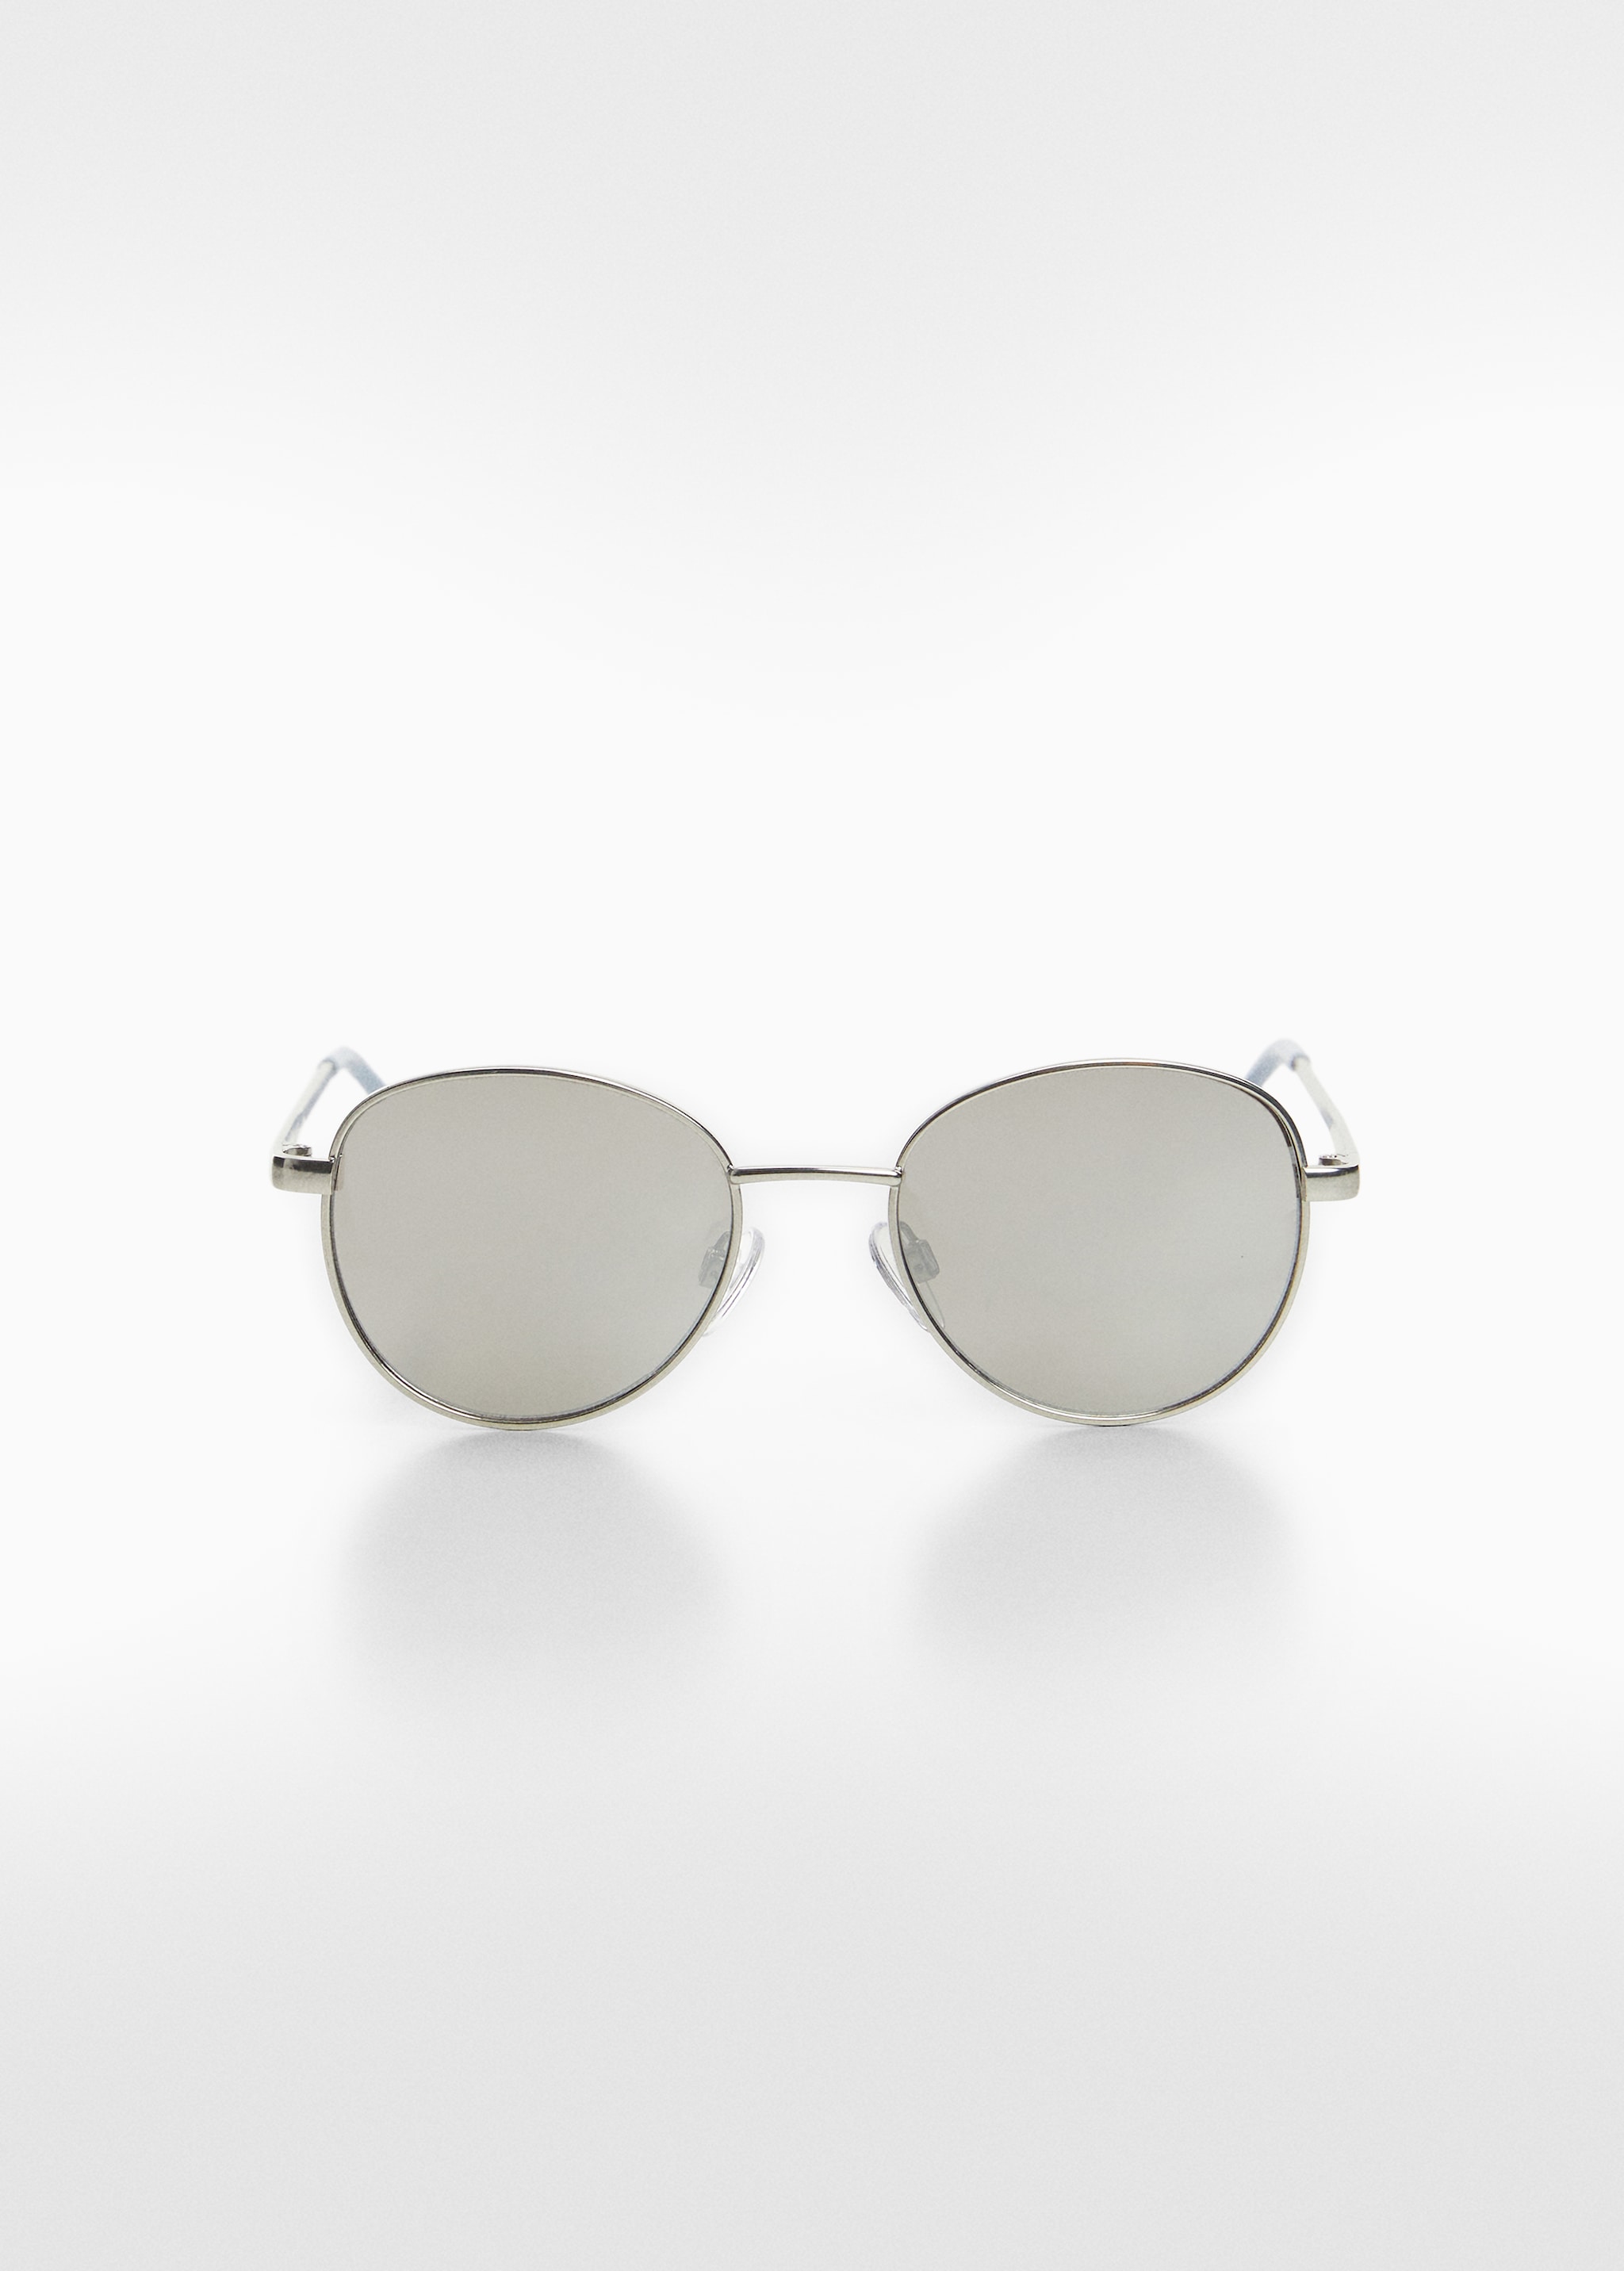 Aviator frame sunglasses - Article without model